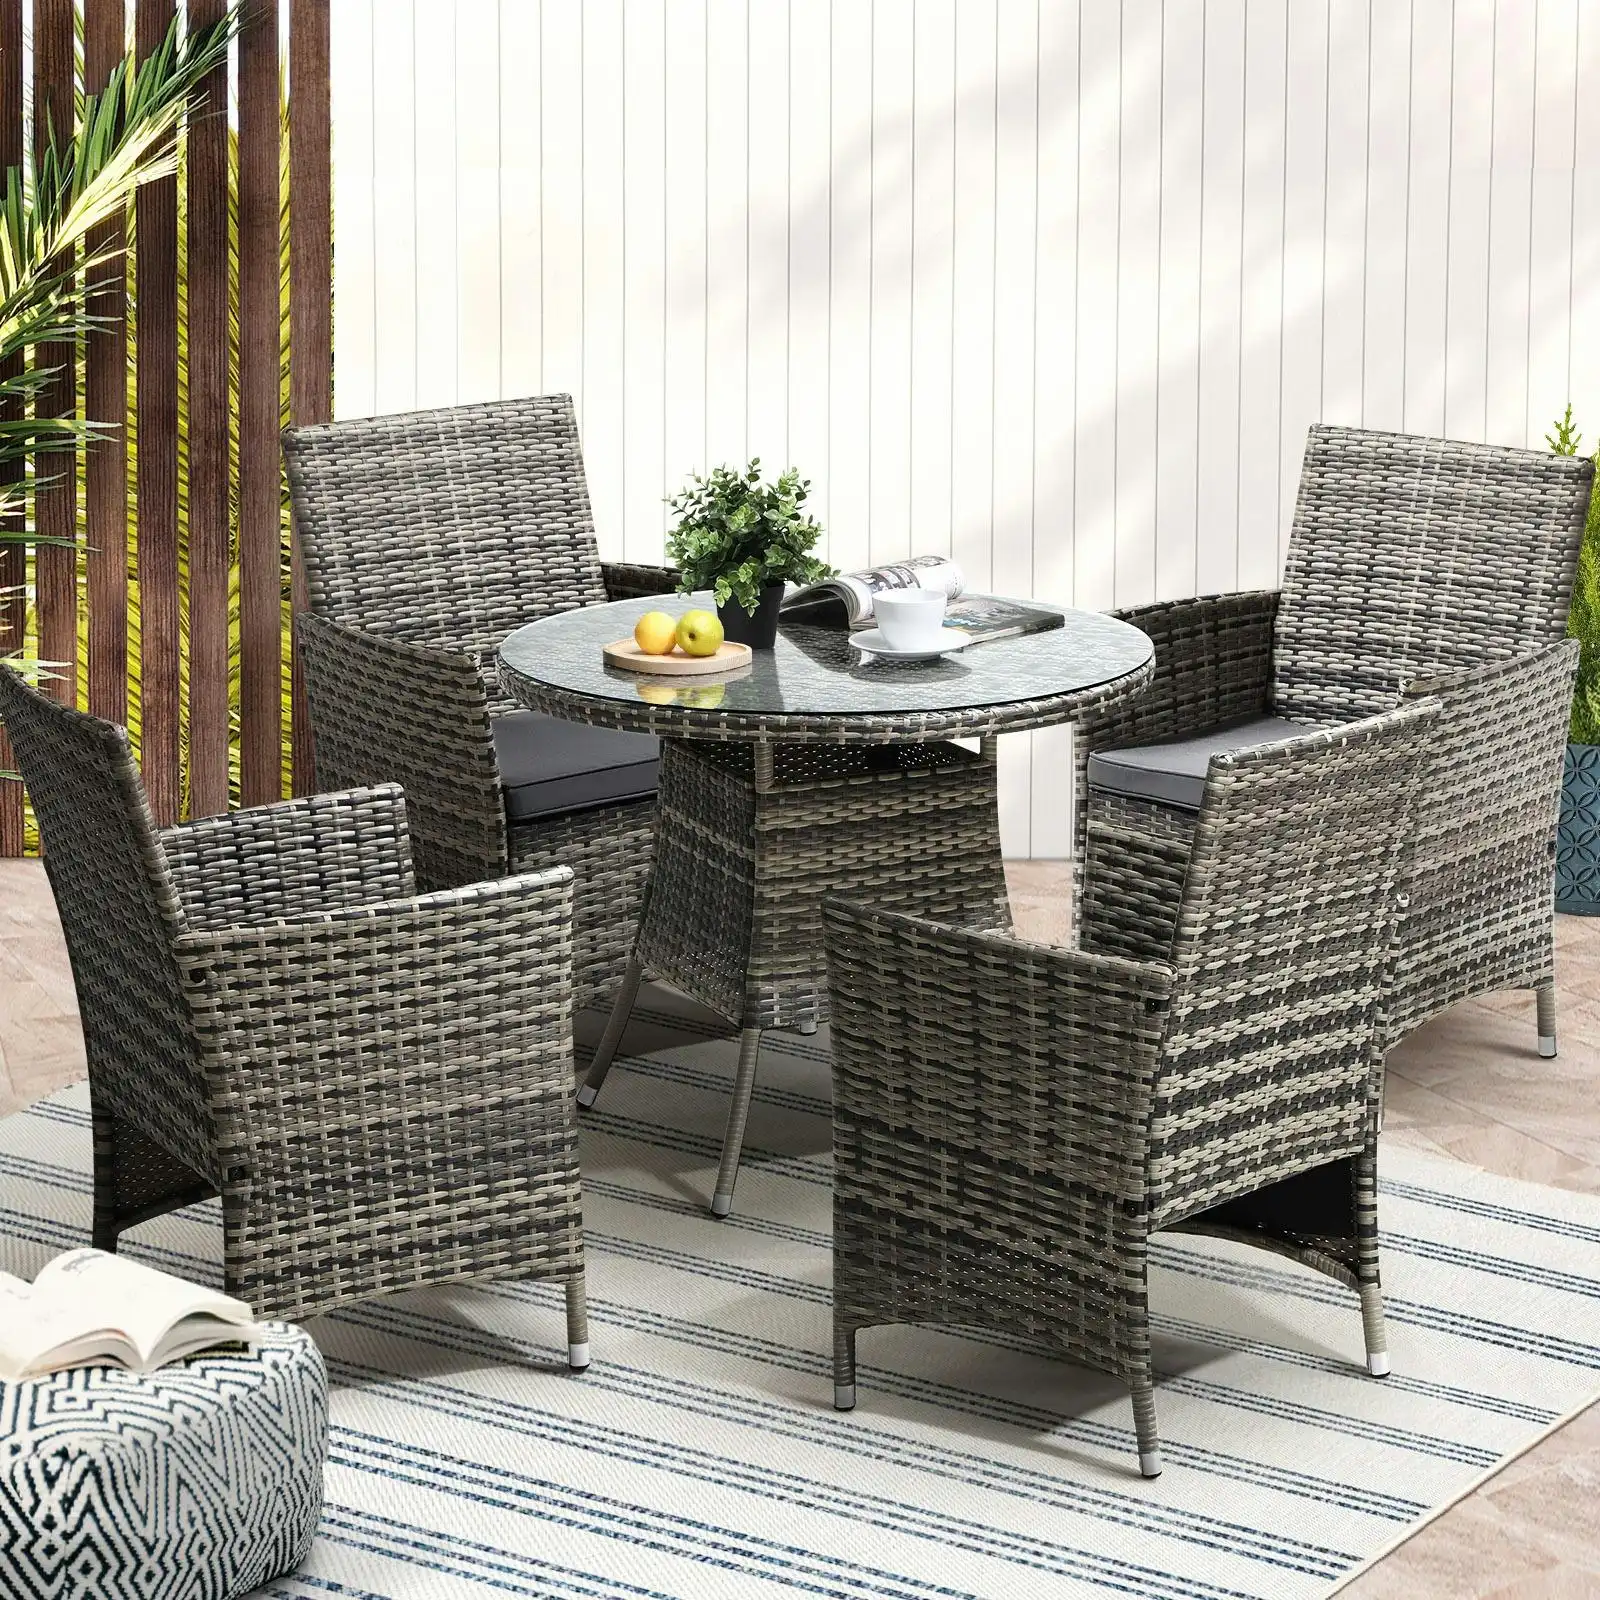 Livsip Outdoor Dining Set Table & Chairs 5PCS Patio Furniture Lounge Setting